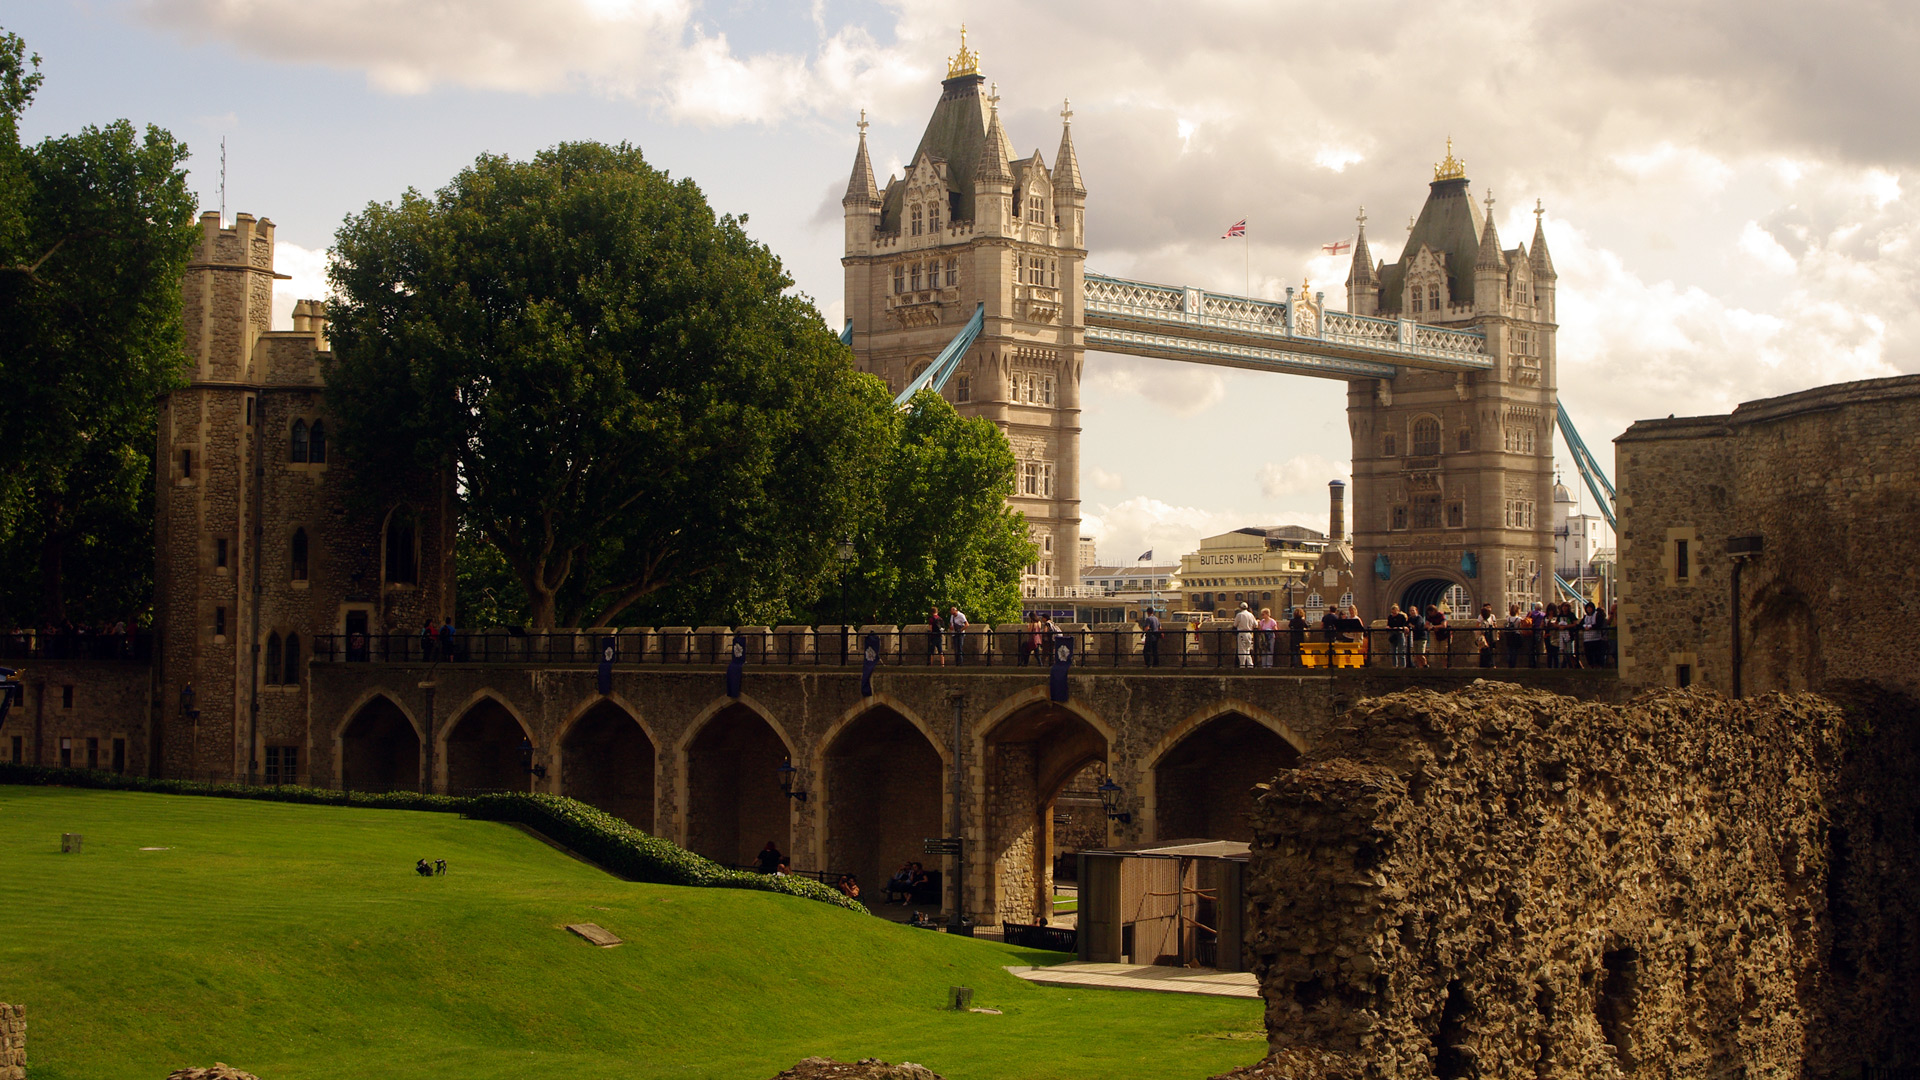 Tower Bridge seen from inside the Tower 
											of London